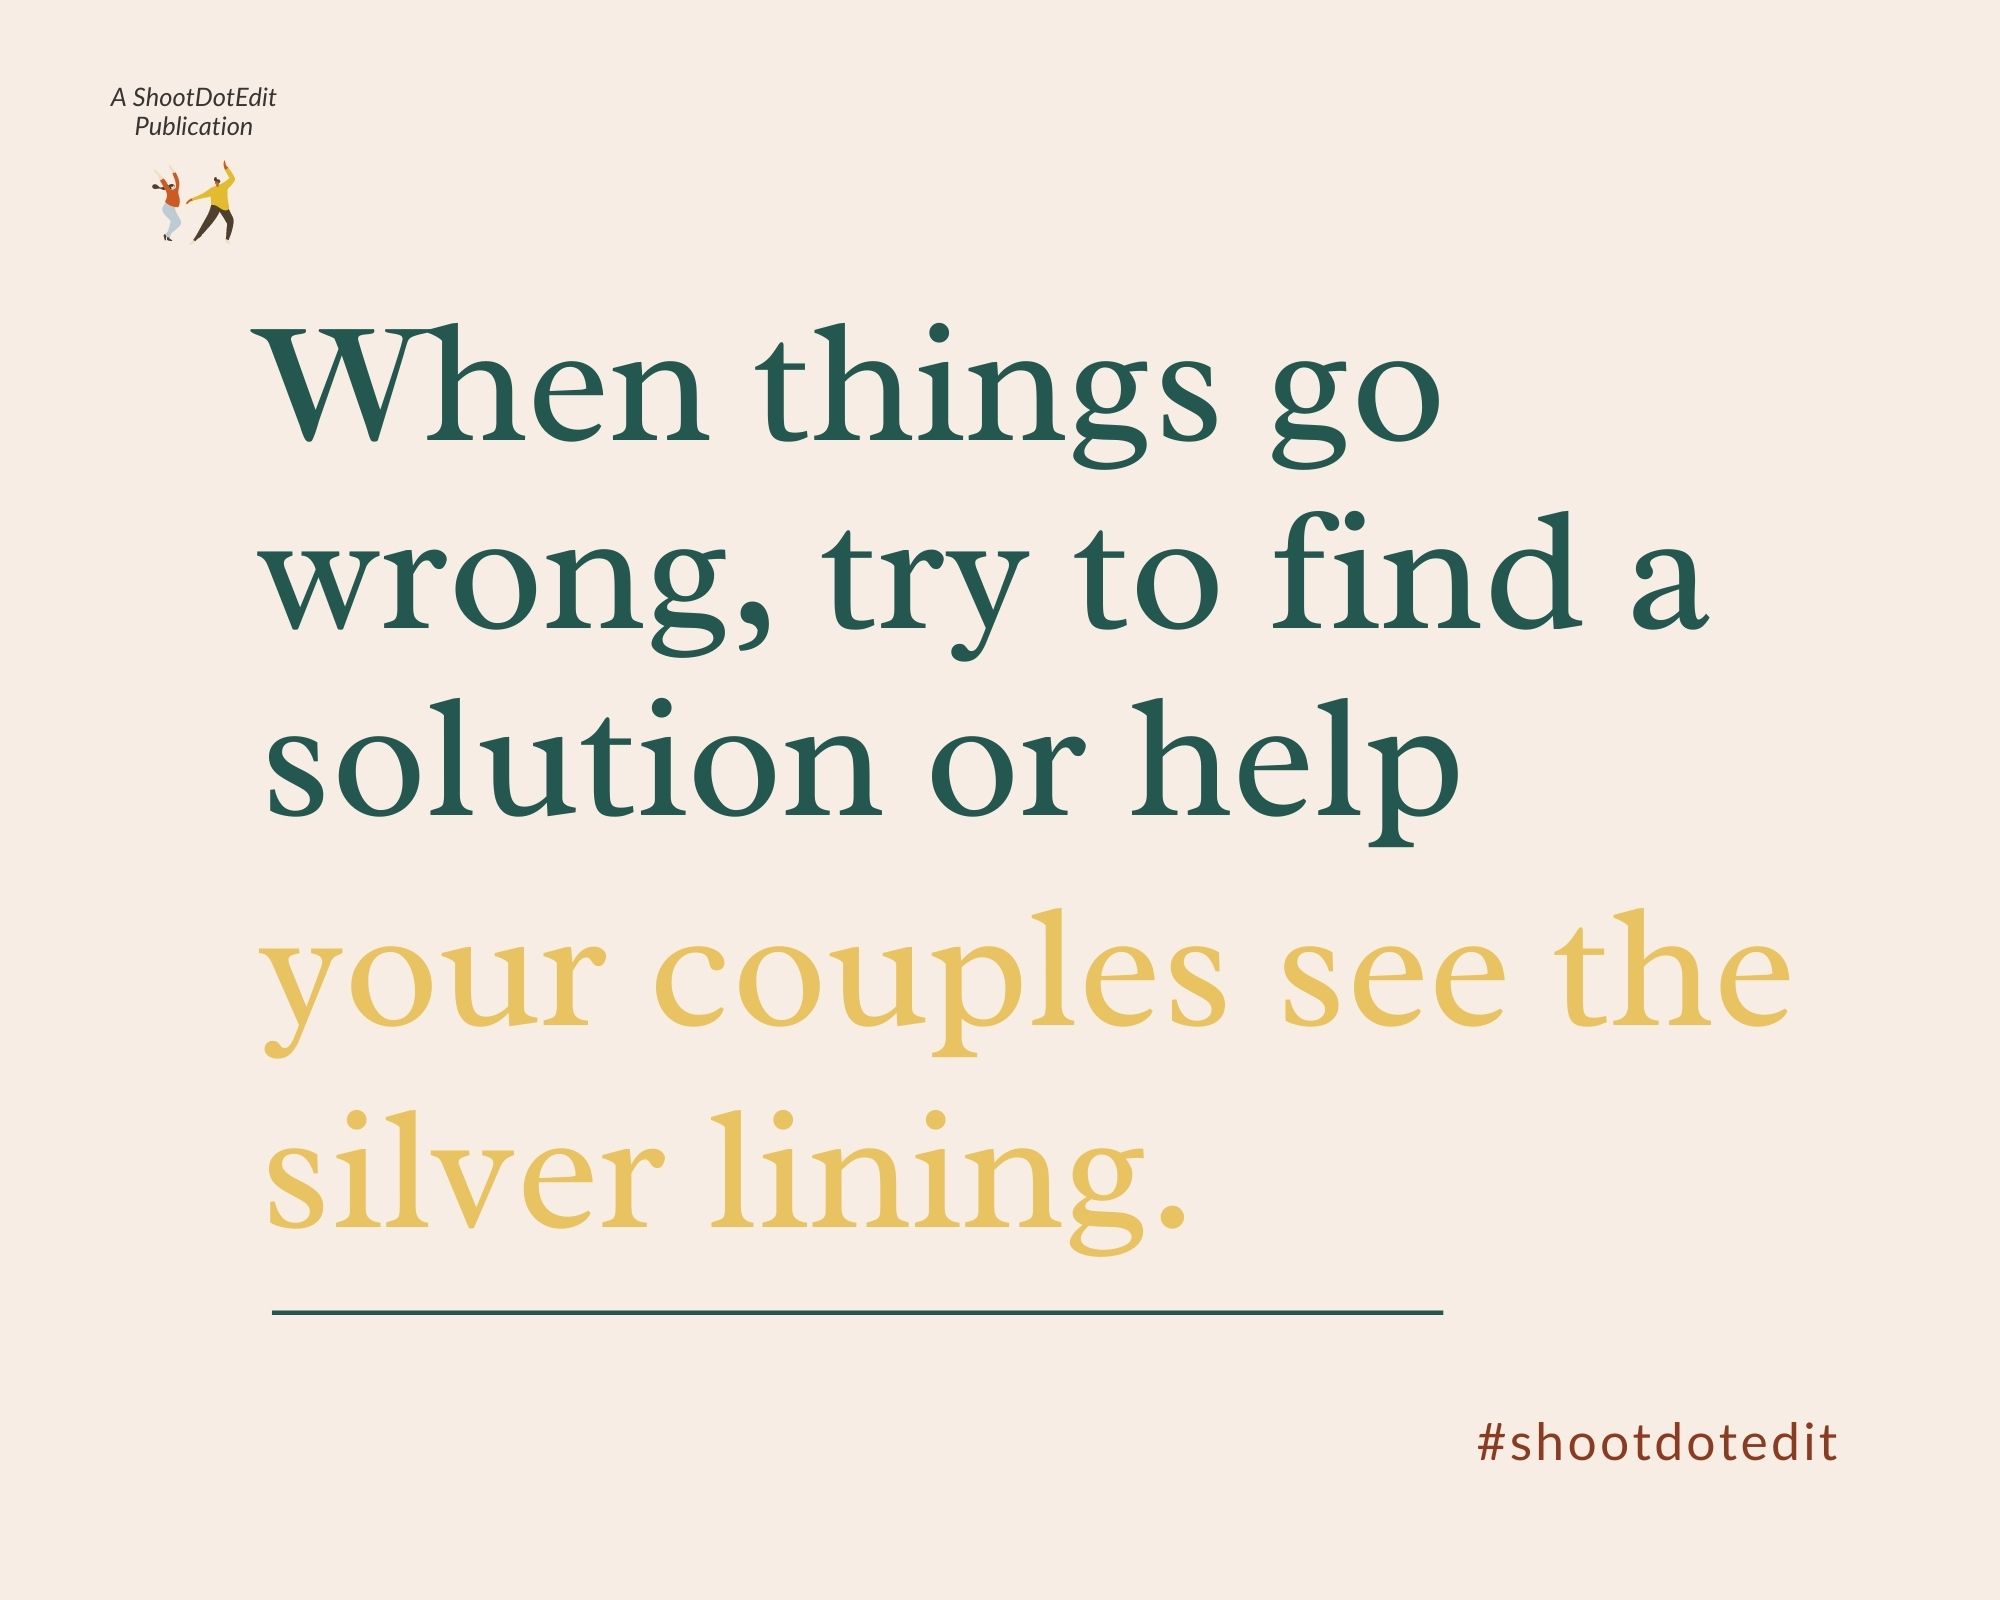 Infographic stating when things go wrong, try to find a solution or help your couples see the silver lining